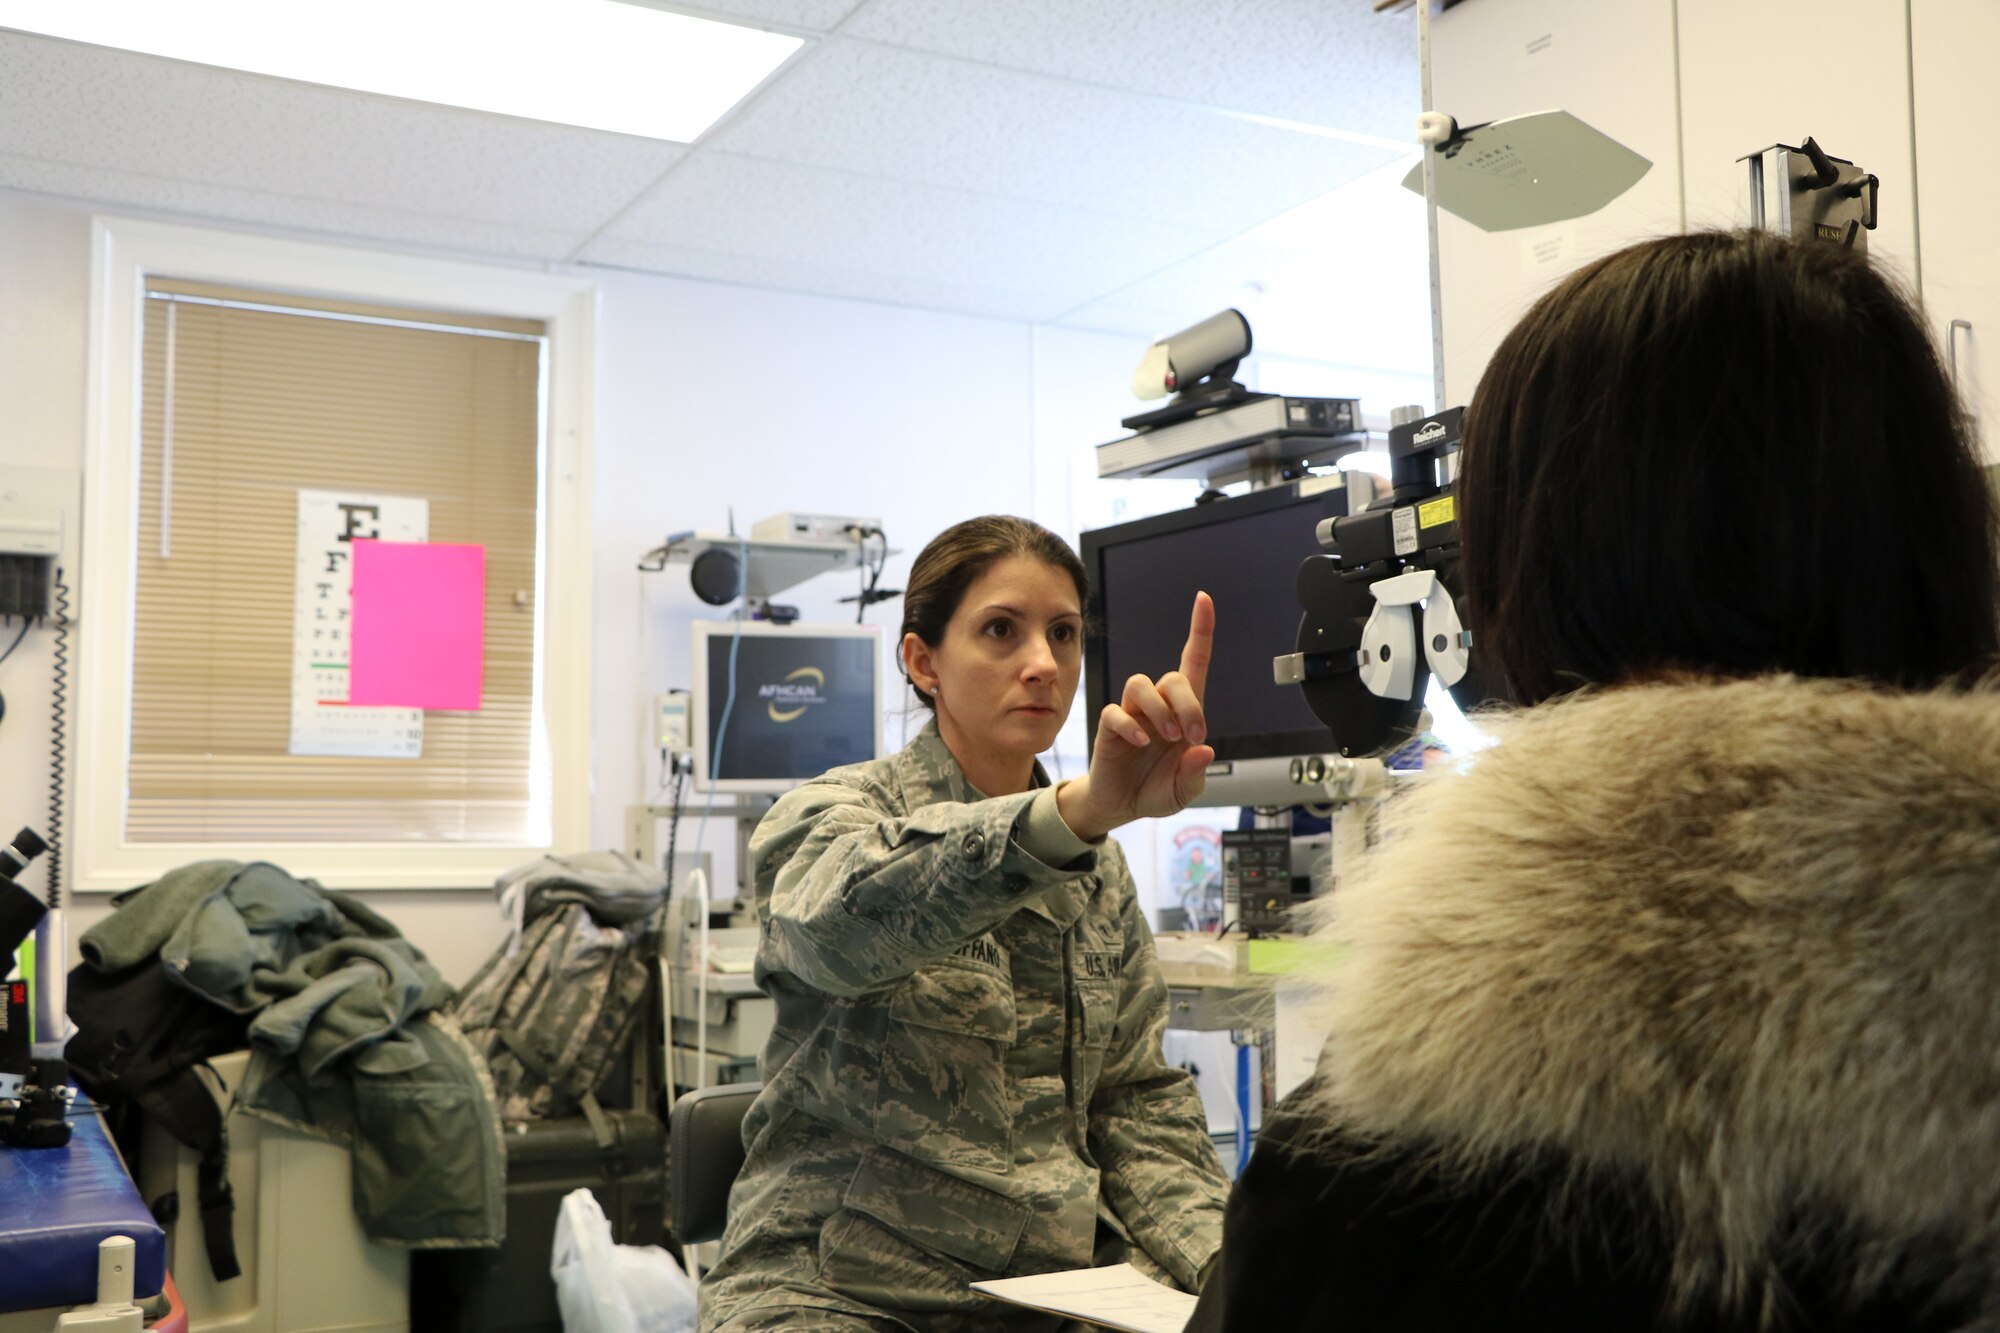 U.S. Air Force Capt. Roxanne Buffano, an optometrist assigned to the 927th Aerospace Medicine Squadron, MacDill AFB FL, conducts an eye exam April 17, 2018 in support of Arctic Care 2018, at the Kivalina Clinic, Kivalina, Alaska. Arctic Care 2018 is an Innovative Readiness Training exercise comprised of a joint and multi-national force, providing medical, dental, optometry and veterinary care for underserved villages in the Maniillaq Service Area April 16-24. (U.S. Air Force photo by Maj. Joe Simms)